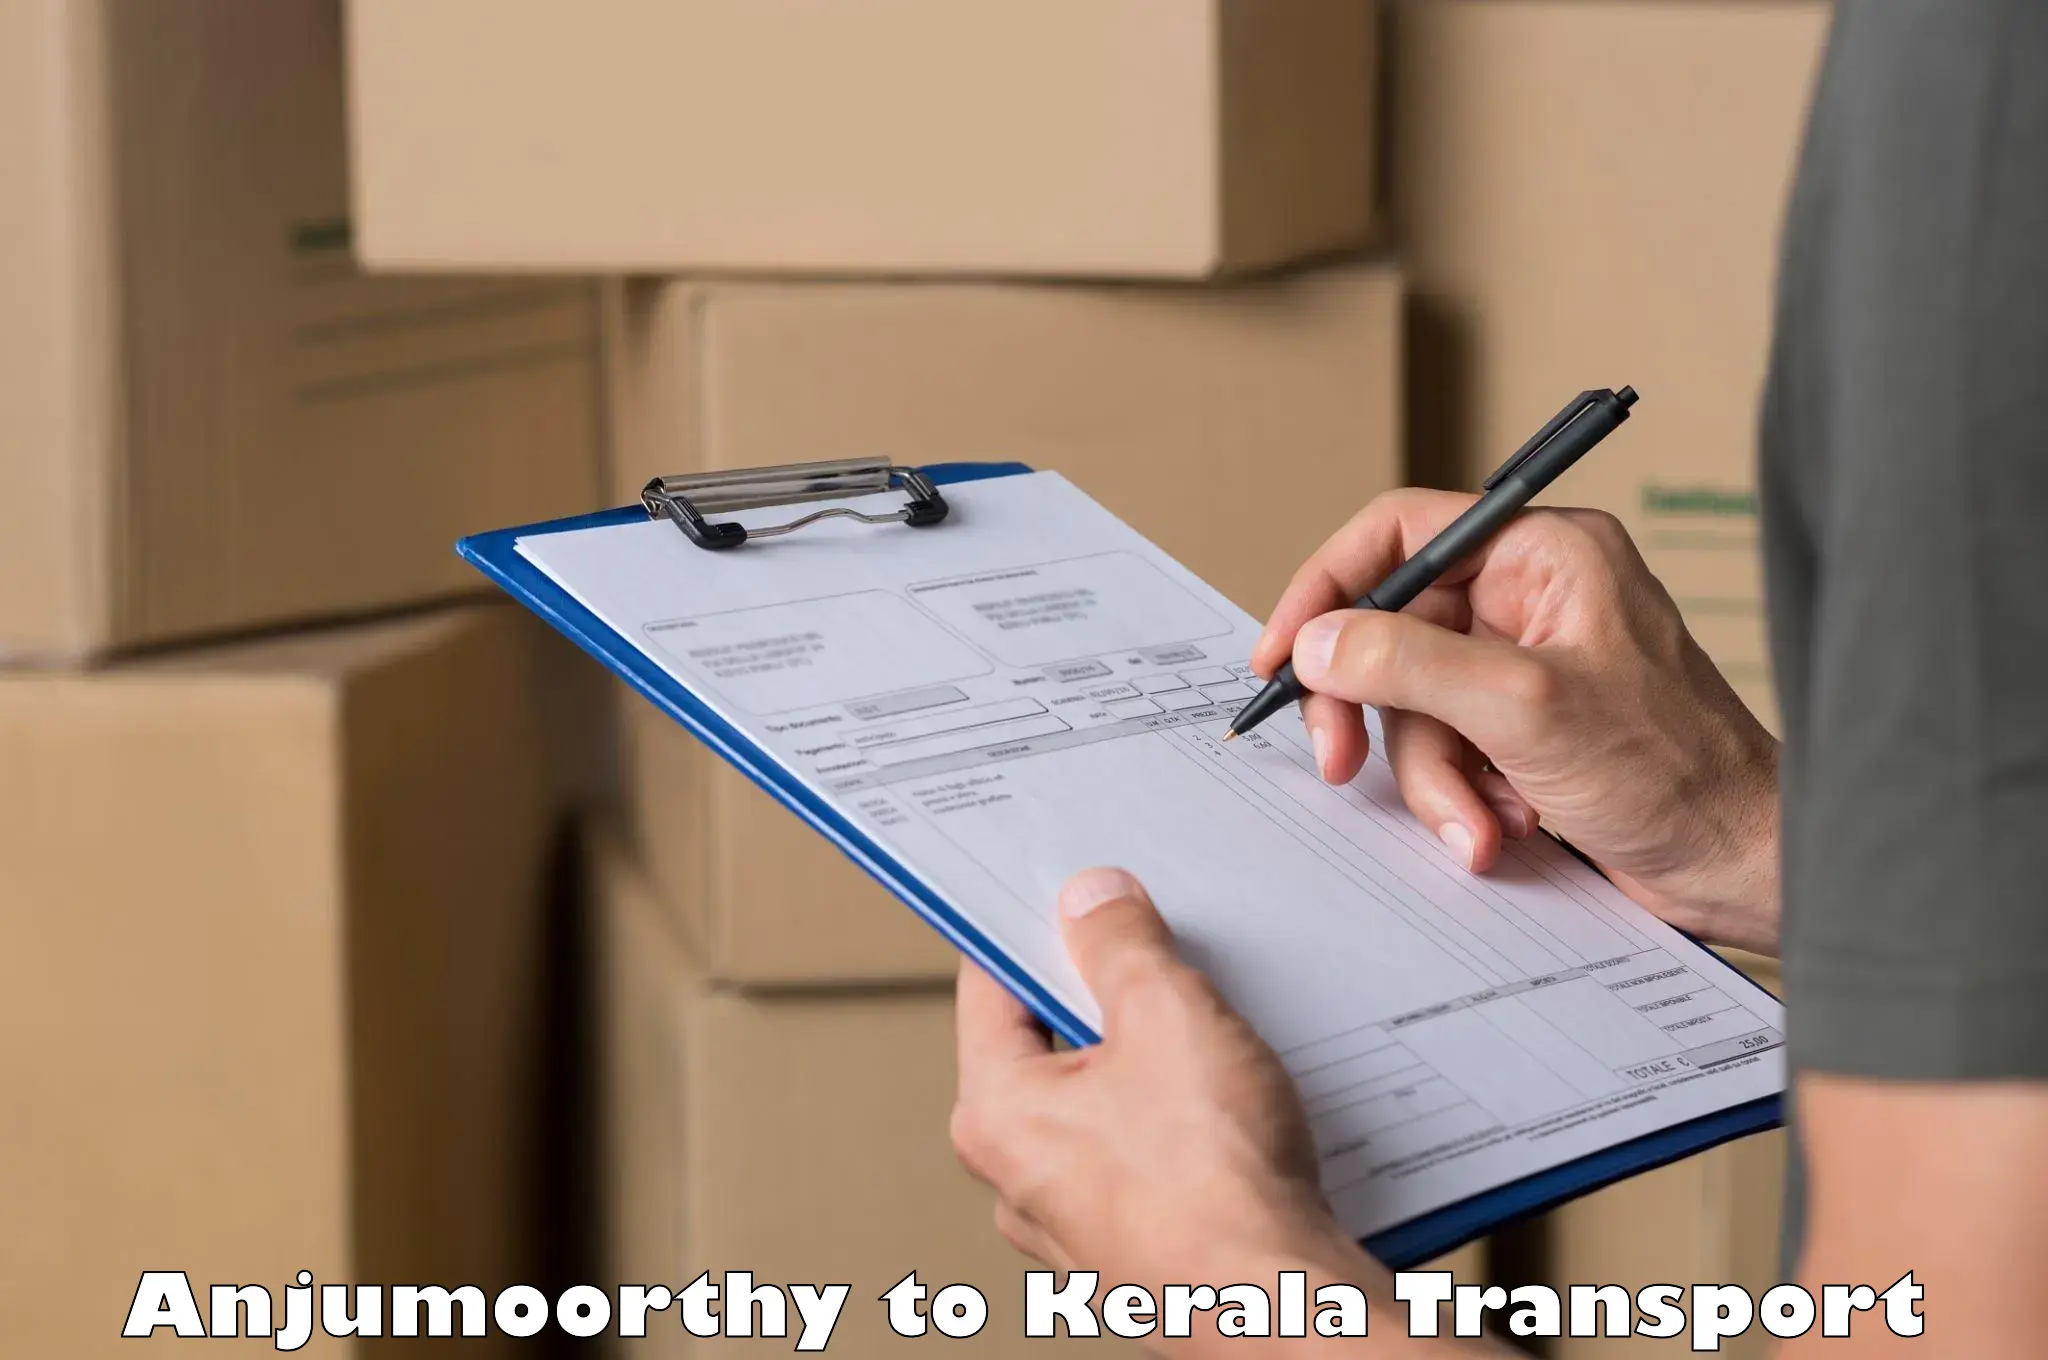 Vehicle courier services Anjumoorthy to Kuchi